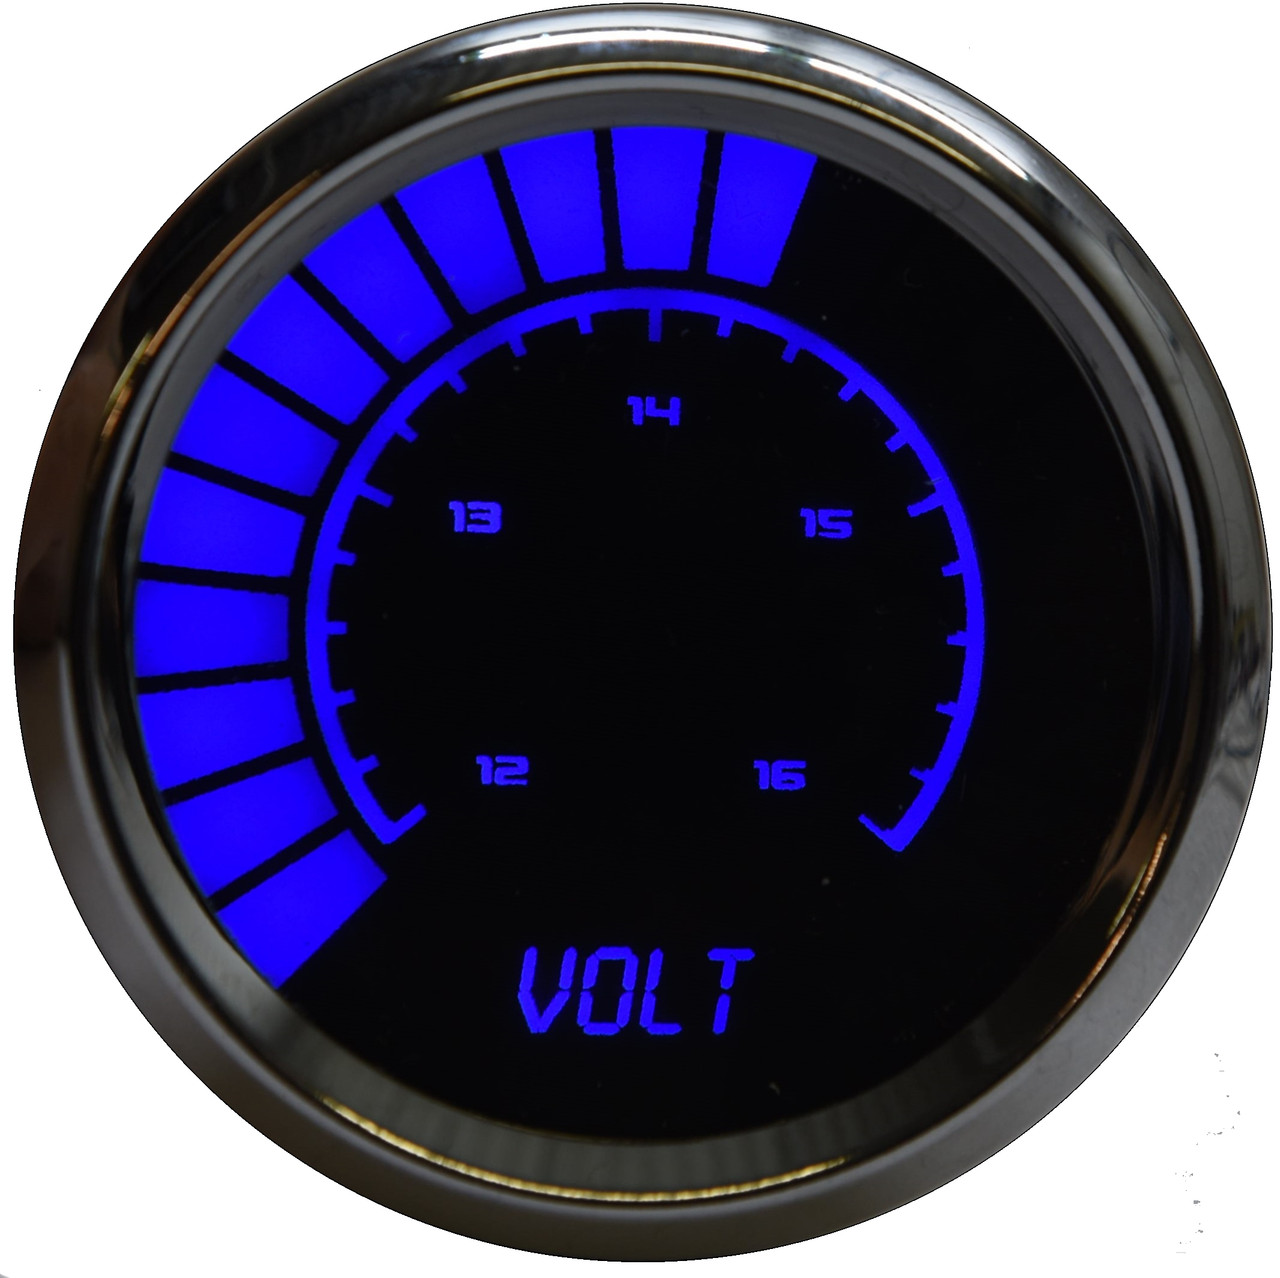 Voltmeter Analog LED Bargraph Chrome Bezel – BS9015
The power of your vehicle is truly only complimented by one other crucial asset: appearance. Now with the new line of Individual Analog LED Bargraph Gauges, you can finally leave that worry deep in the past. Now you can really watch your voltage level with the Intellitronix super bright LED digital voltmeter!
The Voltmeter Analog LED Bargraph is a microprocessor controlled gauge with 12 to 16 volts accuracy and works with any vehicle! It is accurate, super bright, and intelligent all in one.